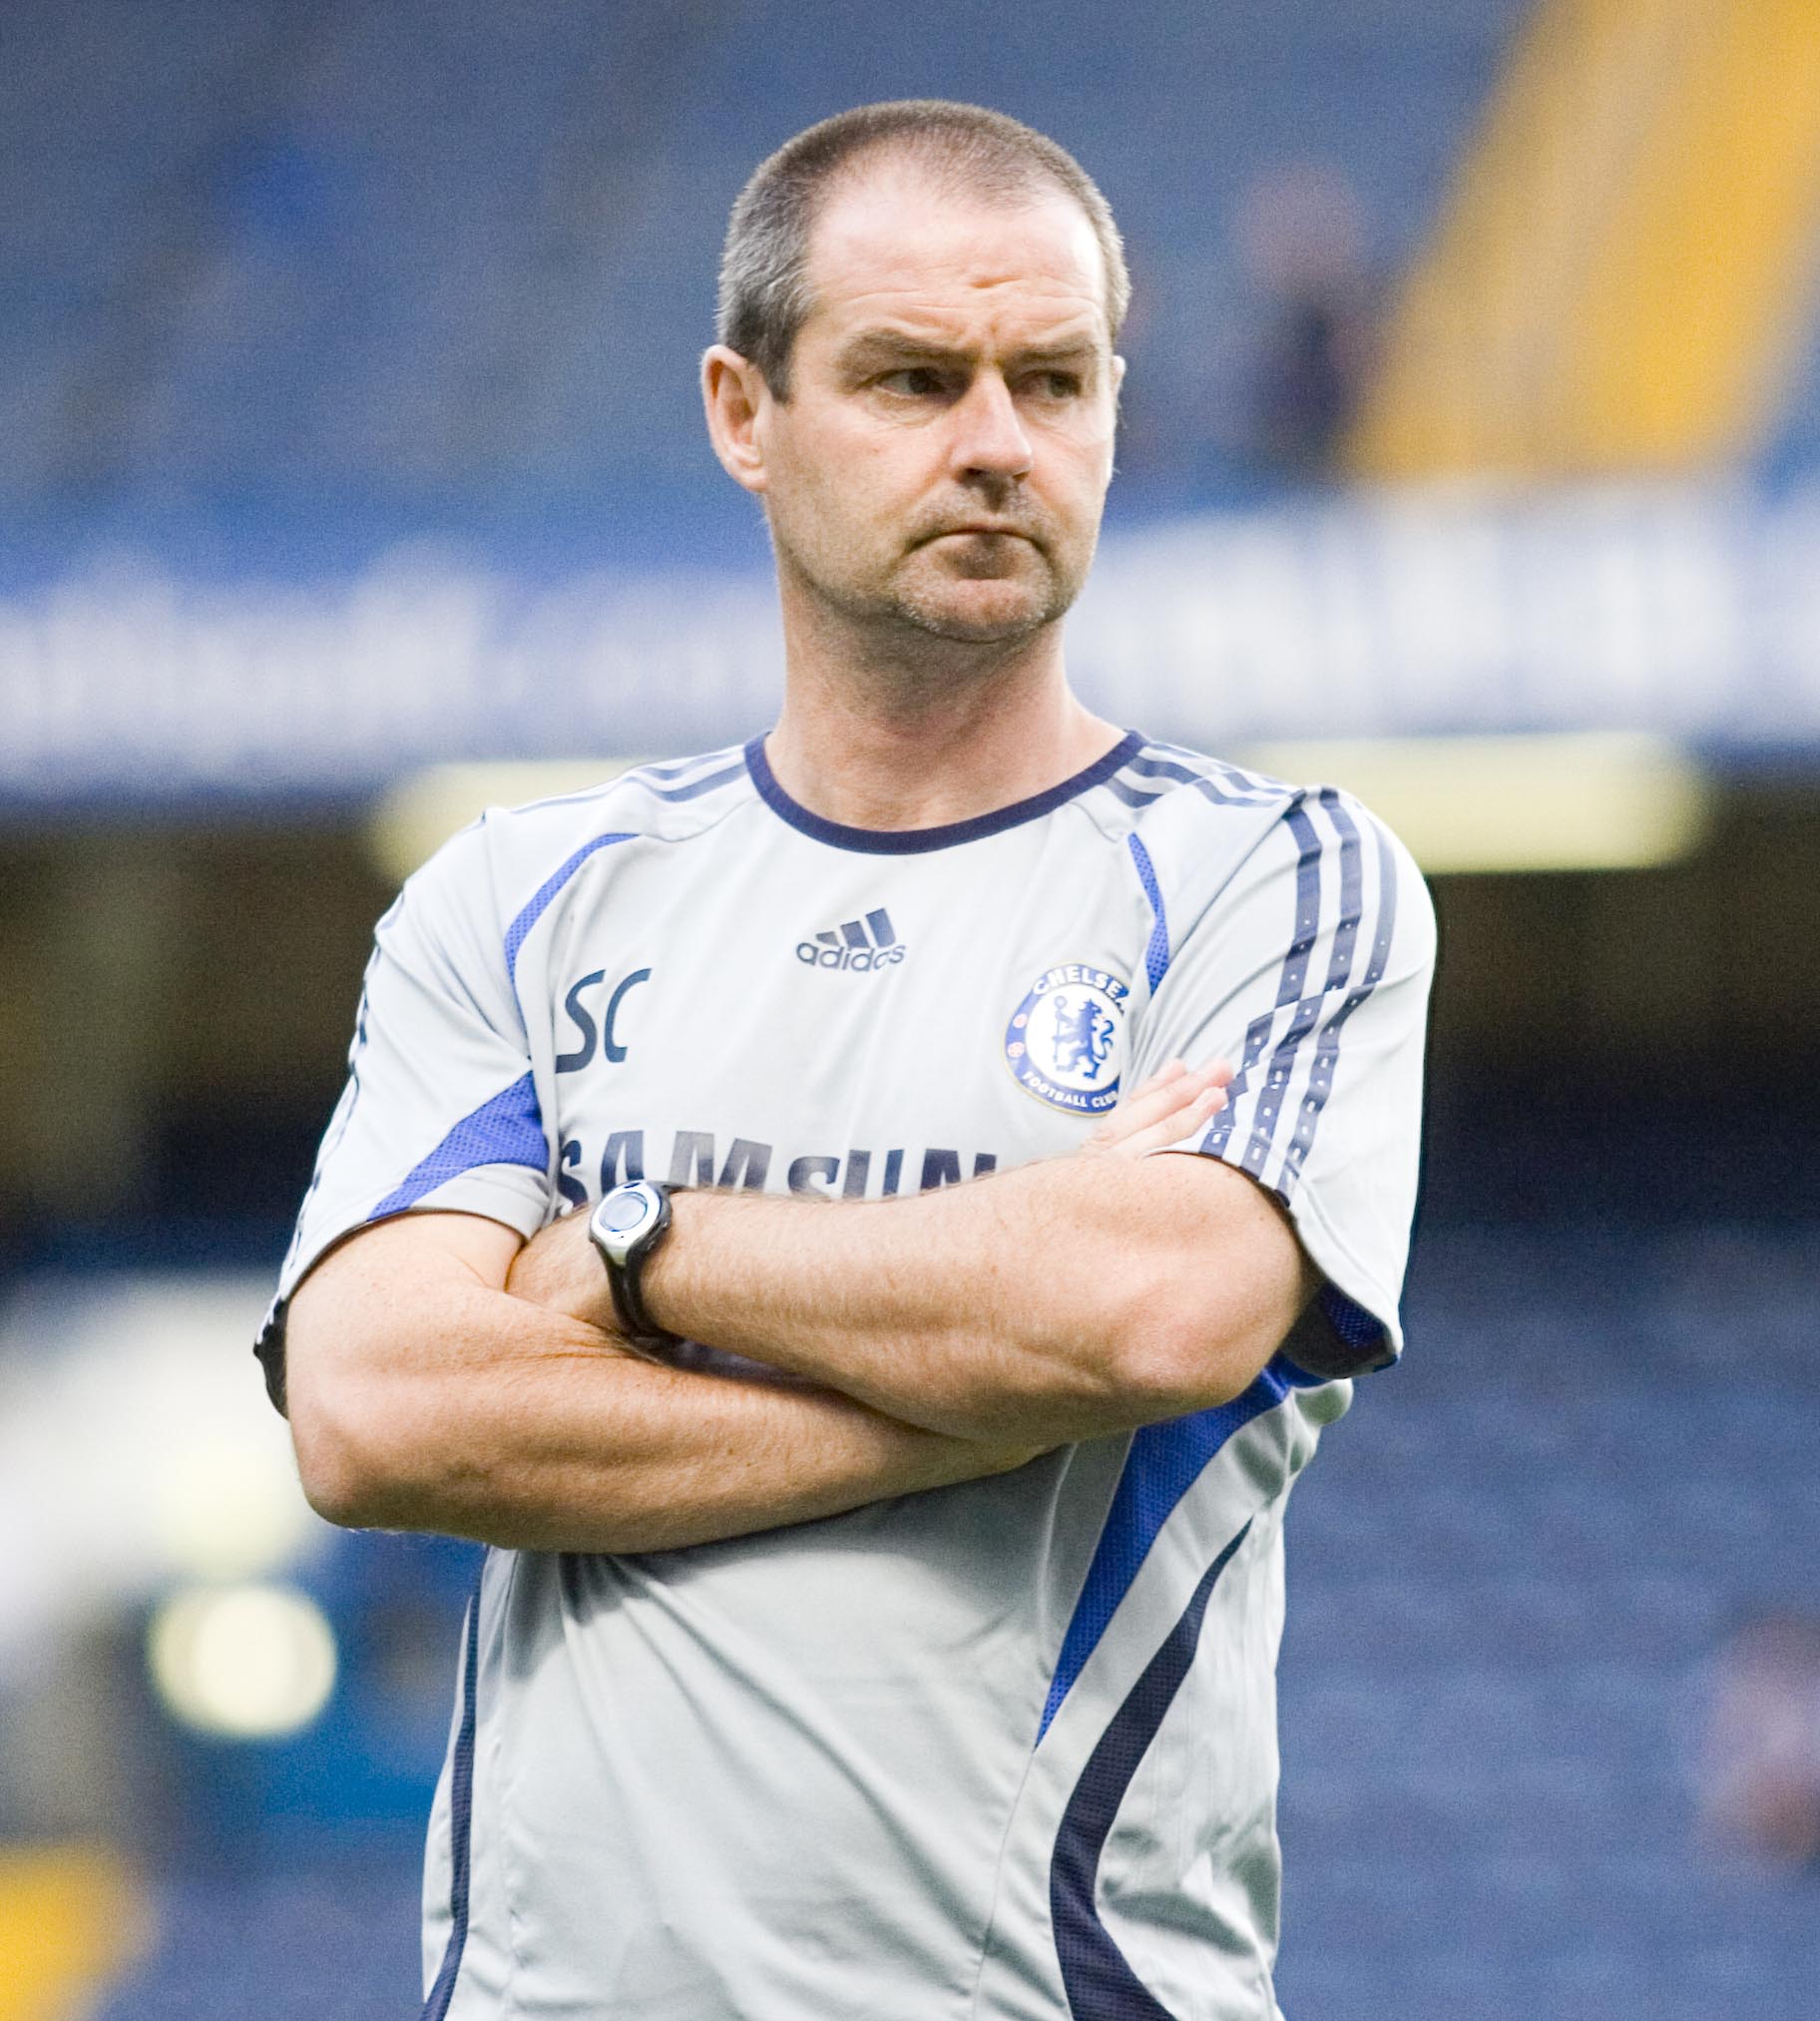 Steve Clarke was a player and a coach at Chelsea.